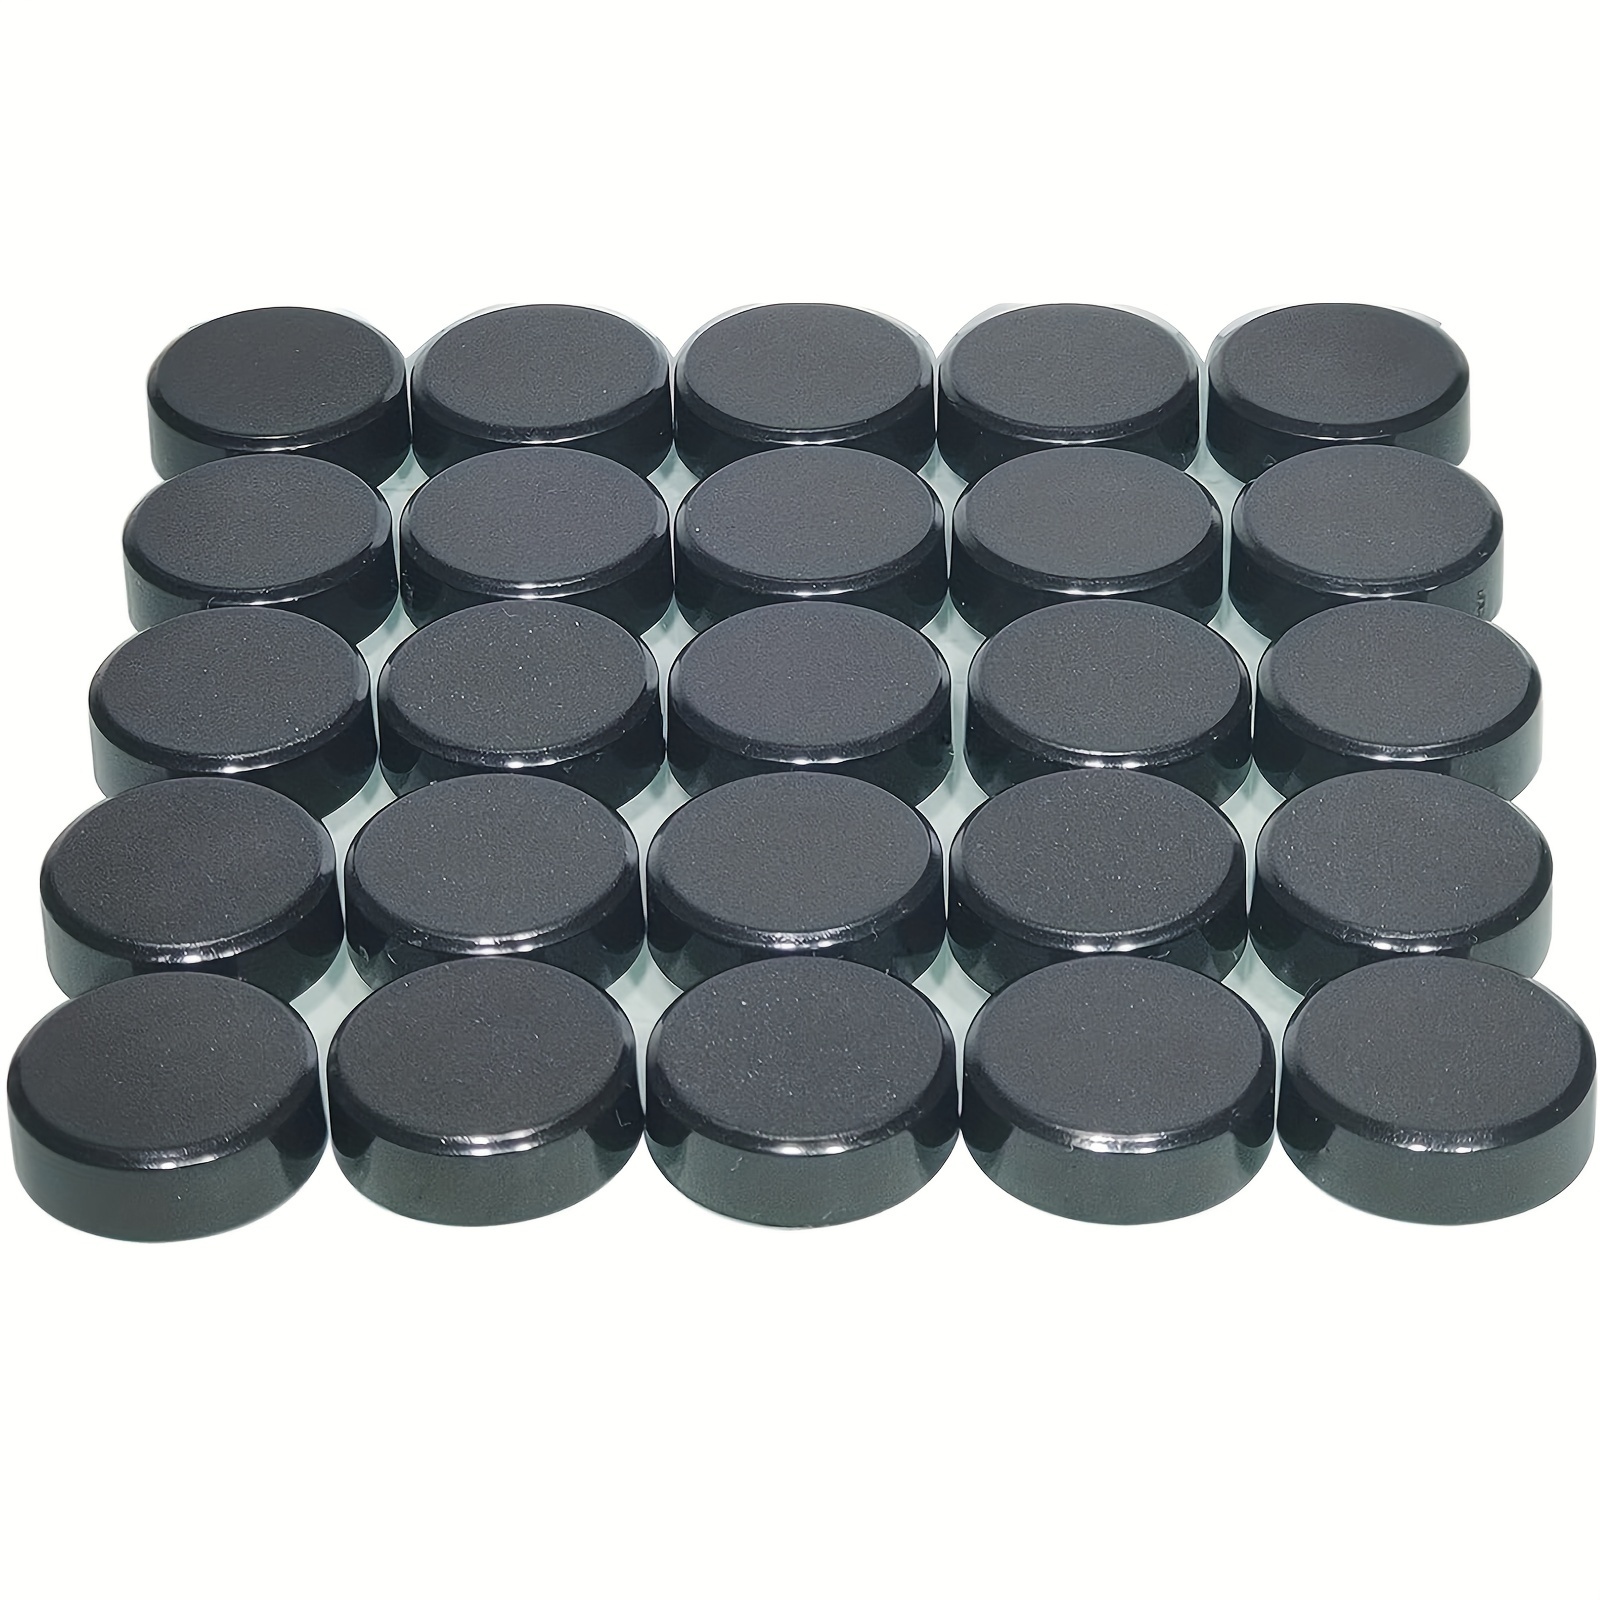 

20pcs Black Round Magnets, Strong Small Magnets For Office Workshop